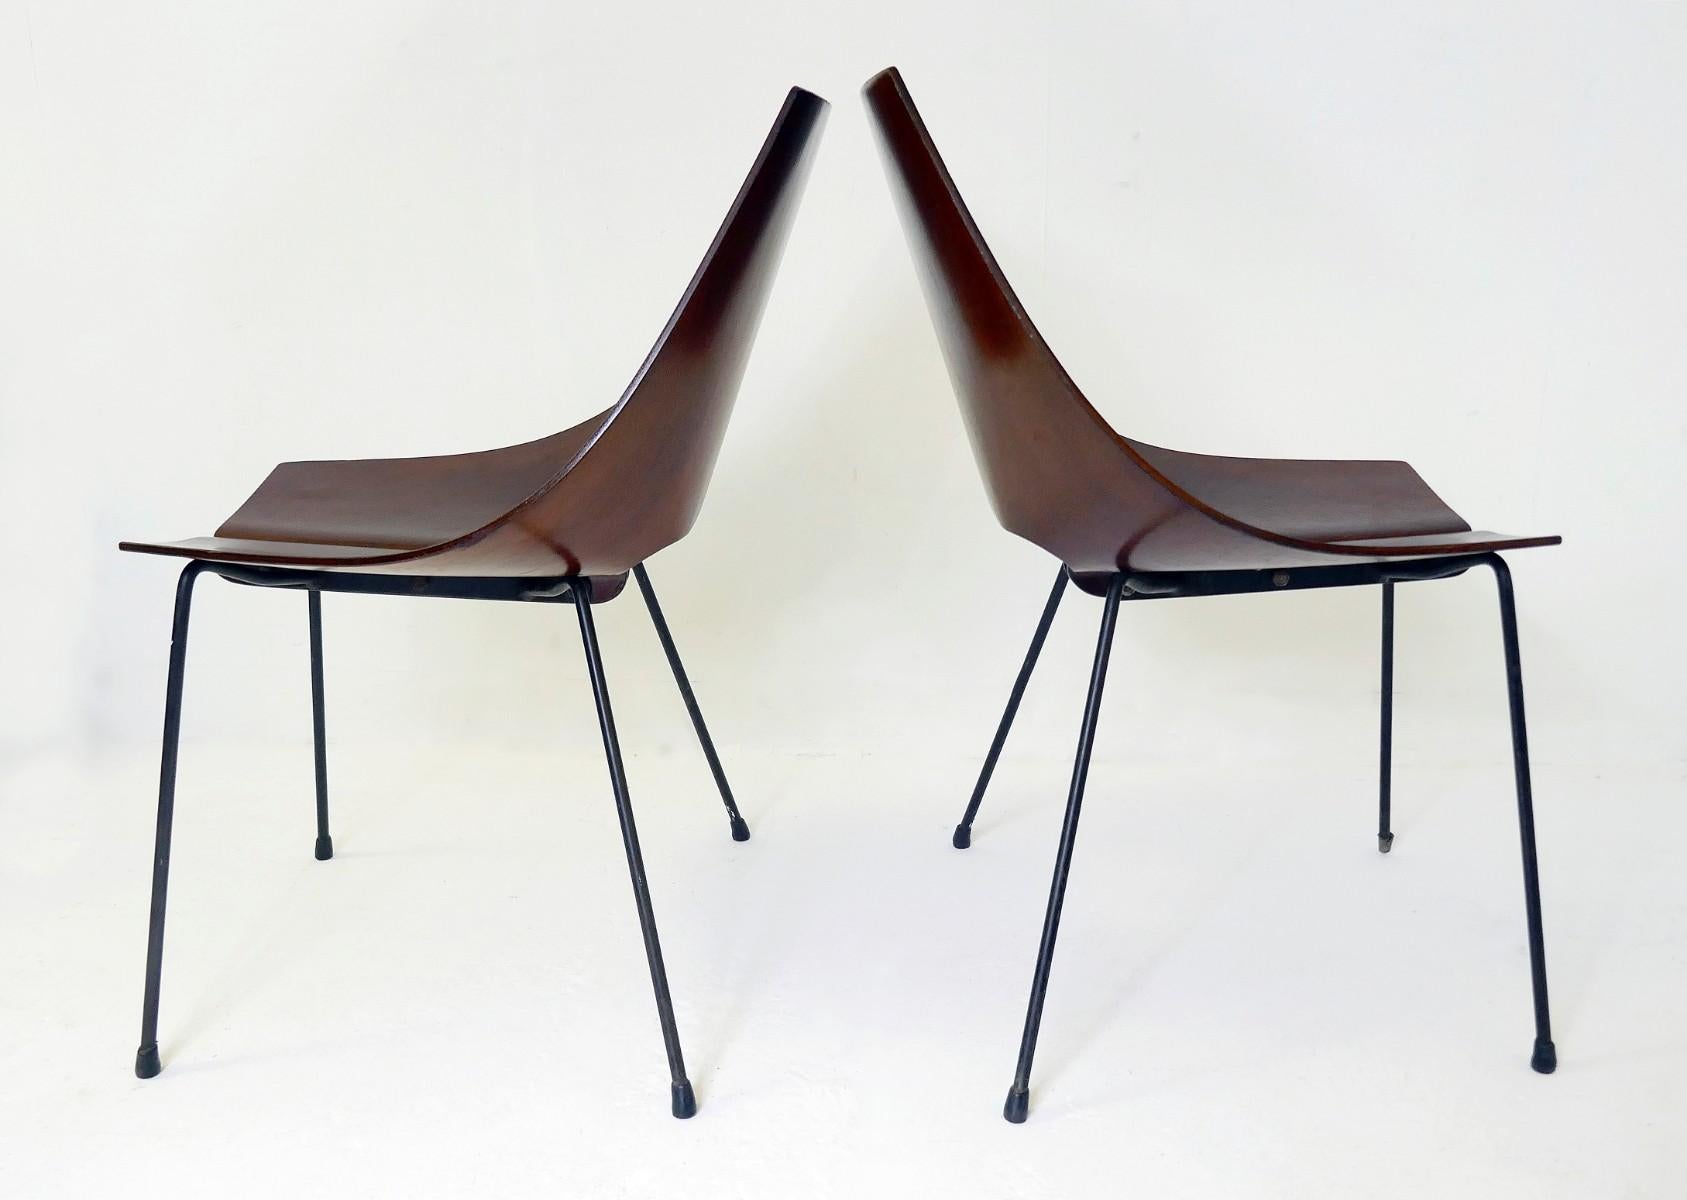 Mid-20th Century Set of Two Italian Chairs Designed by Carlo Ratti, circa 1960